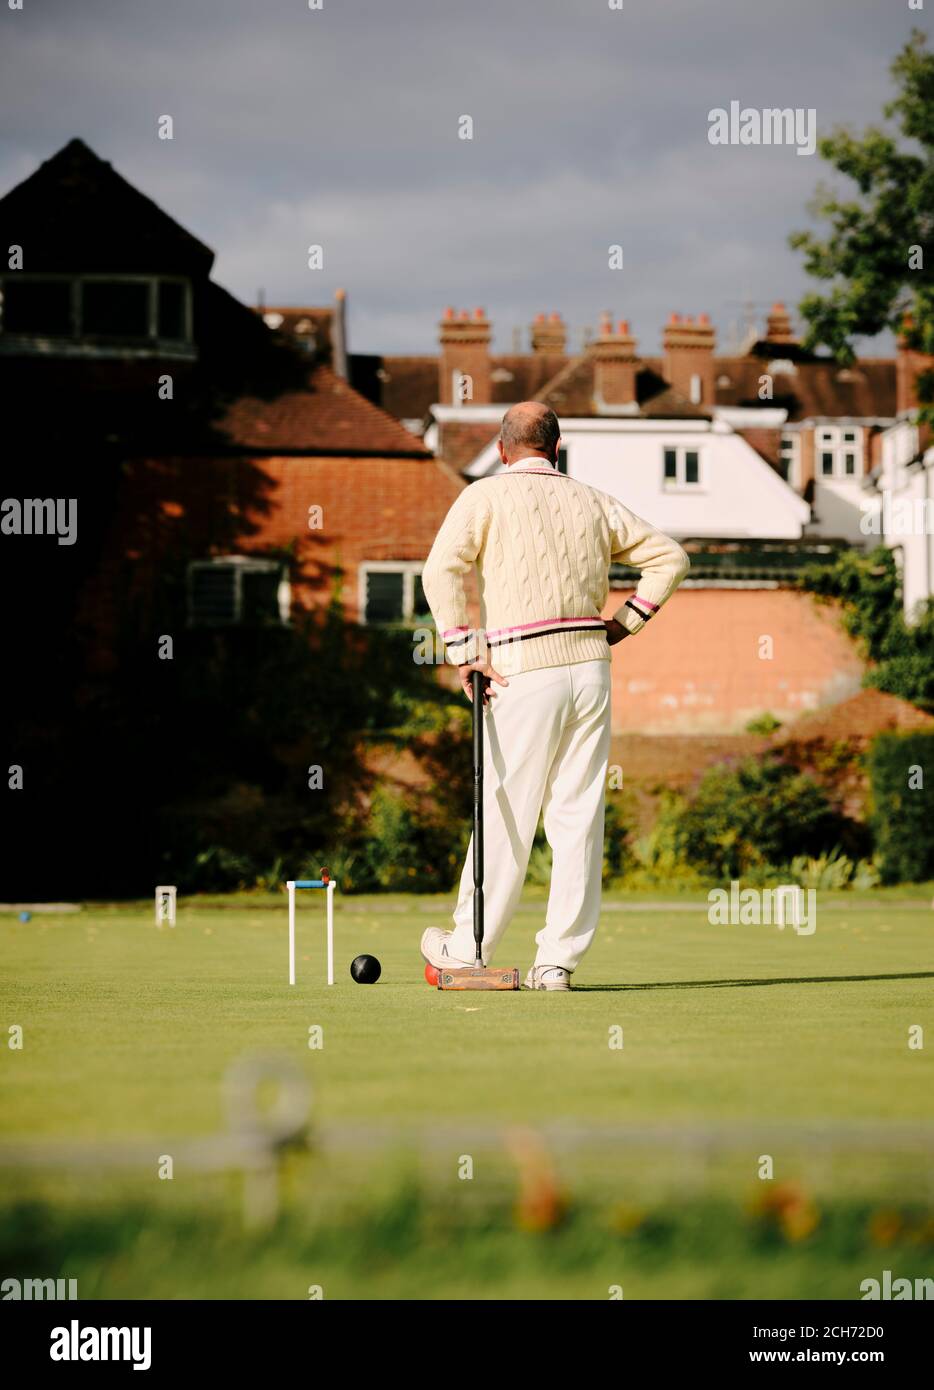 A man dressed in traditional whites playing lawn croquet holding a croquet mallet next to a hoop on a summers day in the UK - summer sport Stock Photo